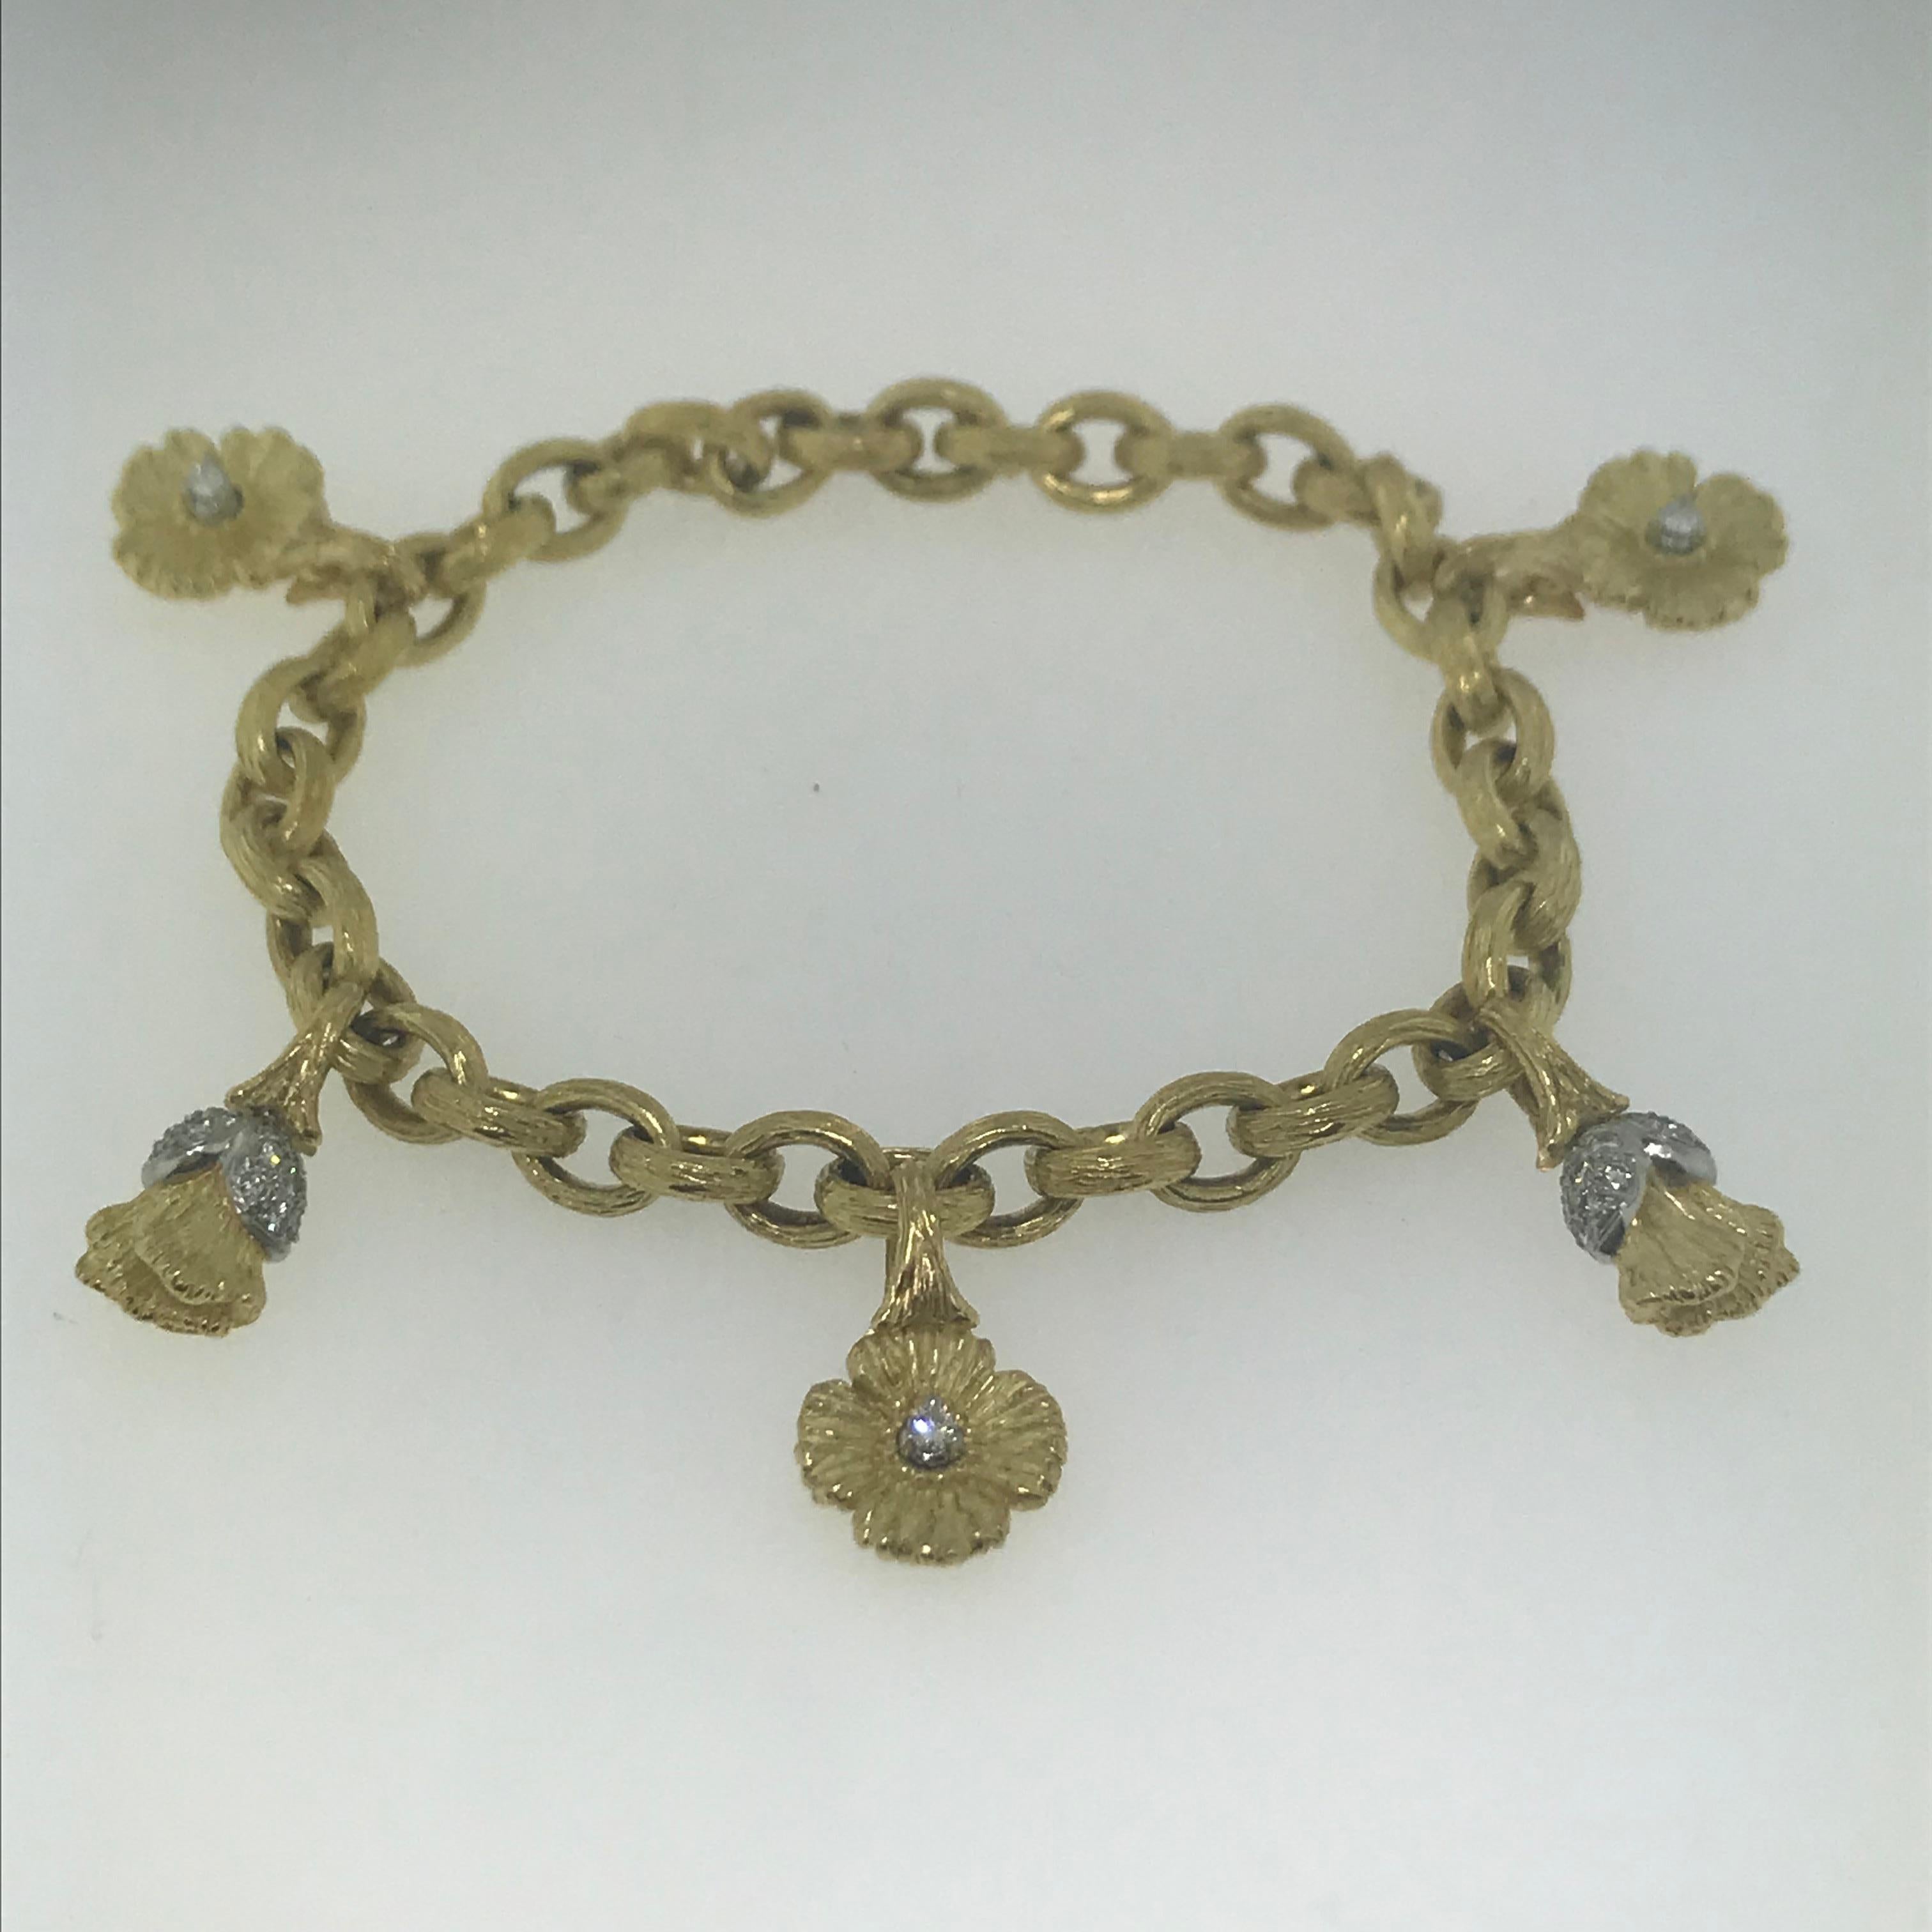 Diamond Flower Charm Bracelet in 18 karat Yellow Gold with 1/2 carat of diamonds (.50 carats).  These piece has the feel of a famous designer and the color of the gold and platinum is very rich and heavy.
Full of grace and importance is the owner of